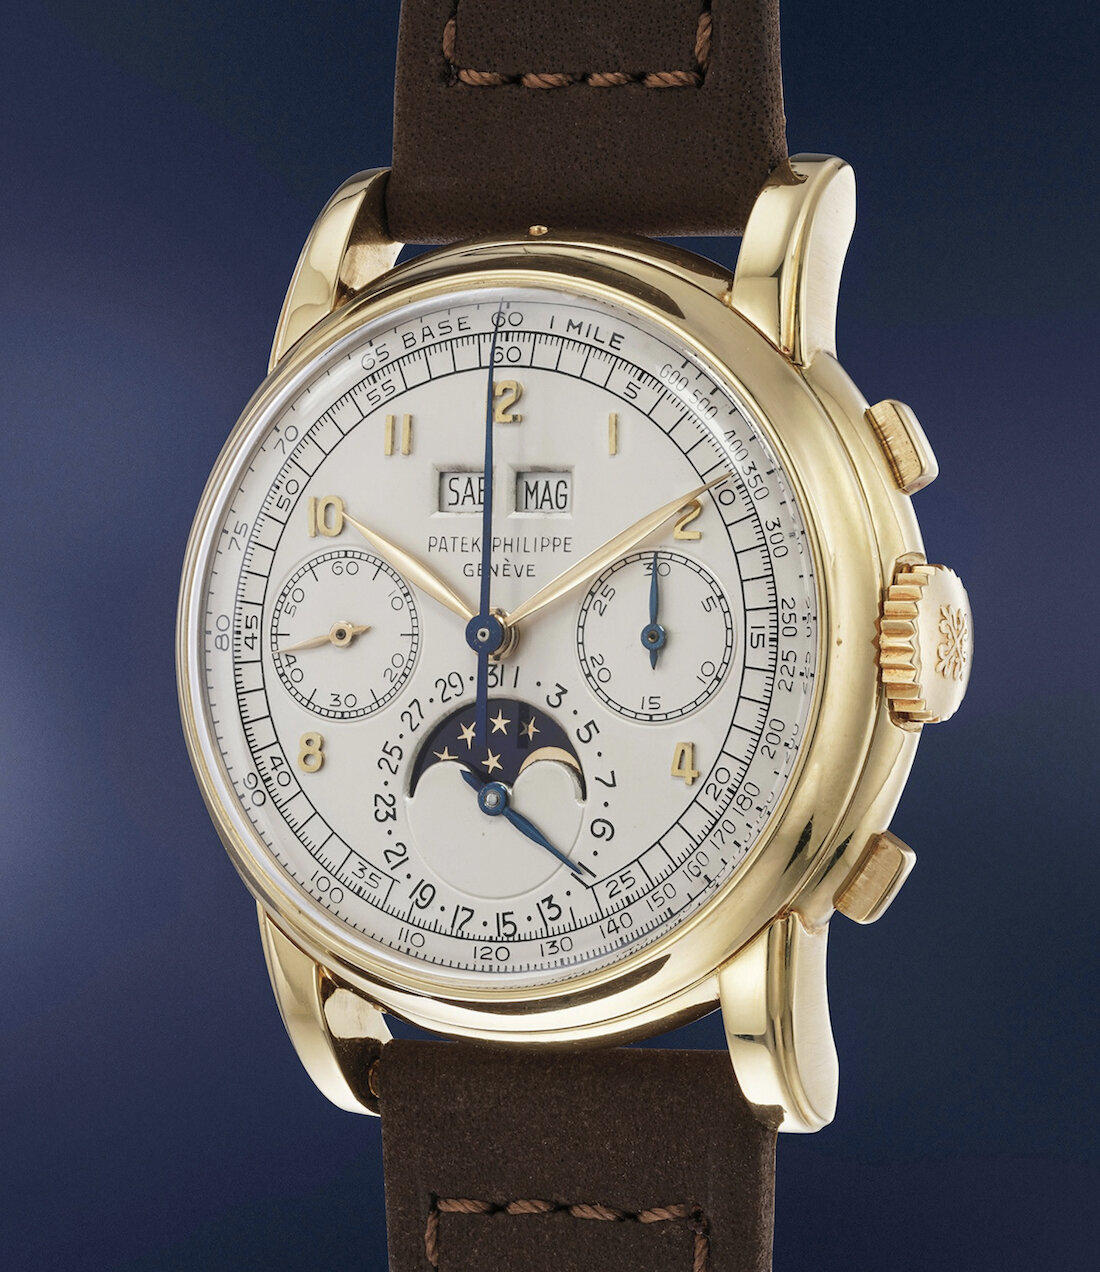 Patek Philippe brings back the 'holy grail' of watches for 170